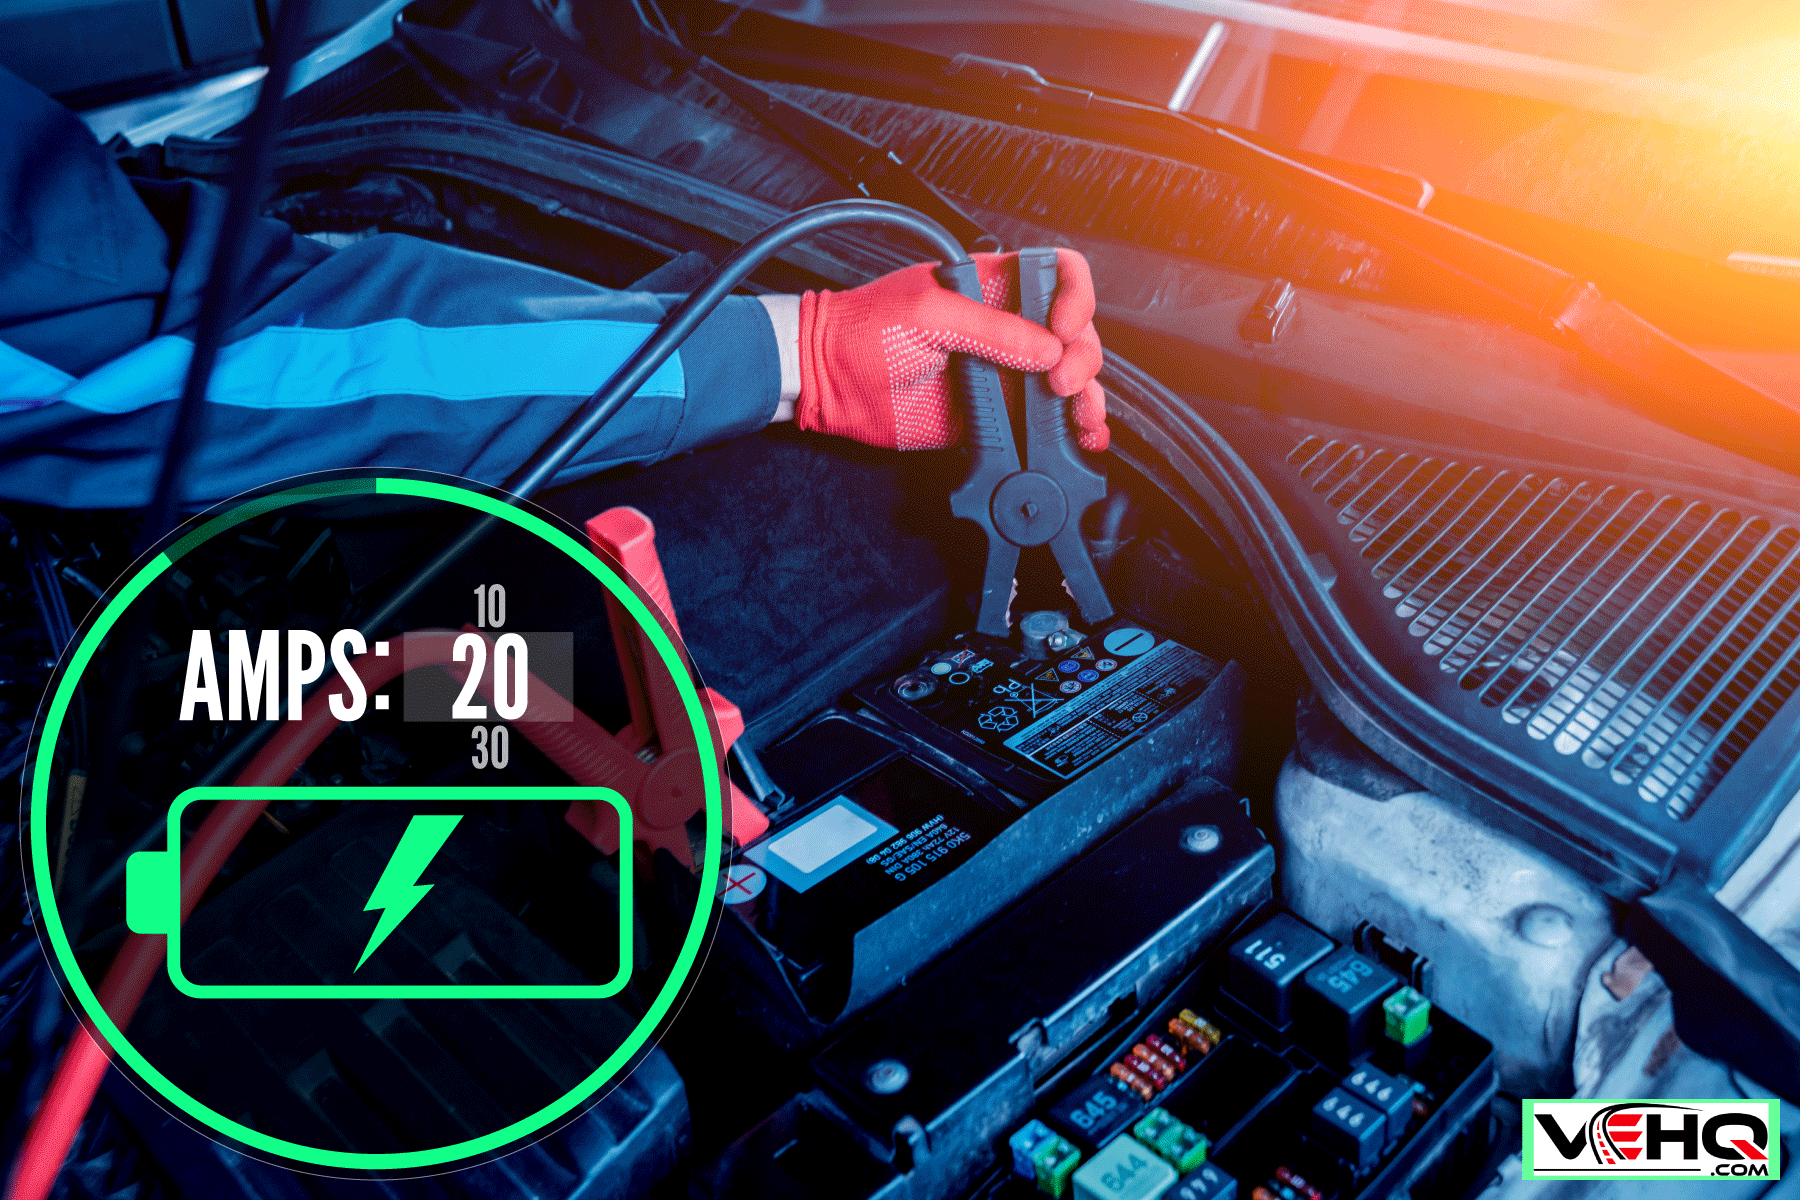 How Long to Charge a Car Battery at 30 Amps?